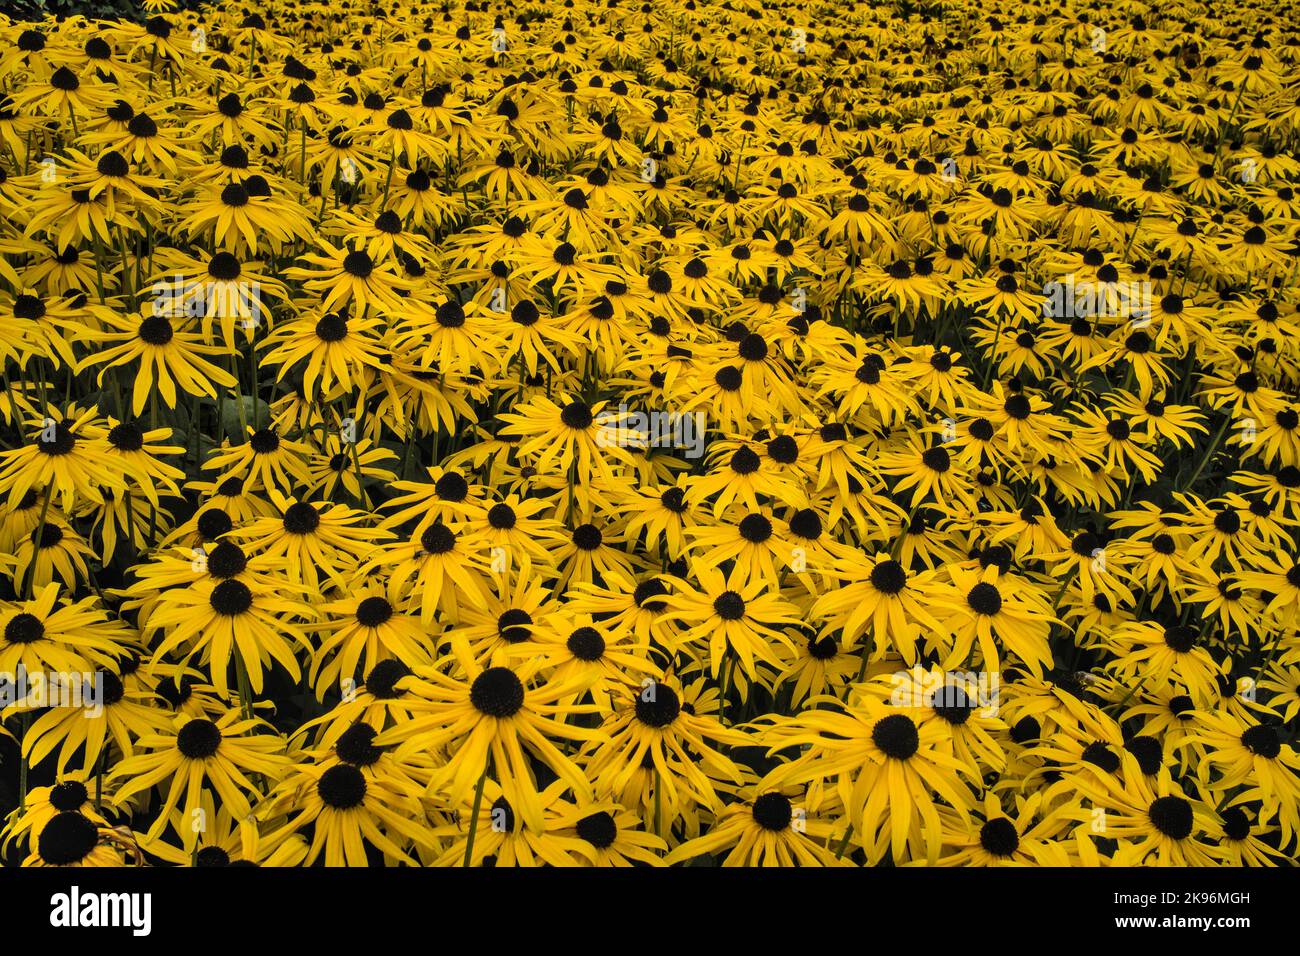 Beautiful yellow Rudbeckia flowers filling the frame Stock Photo